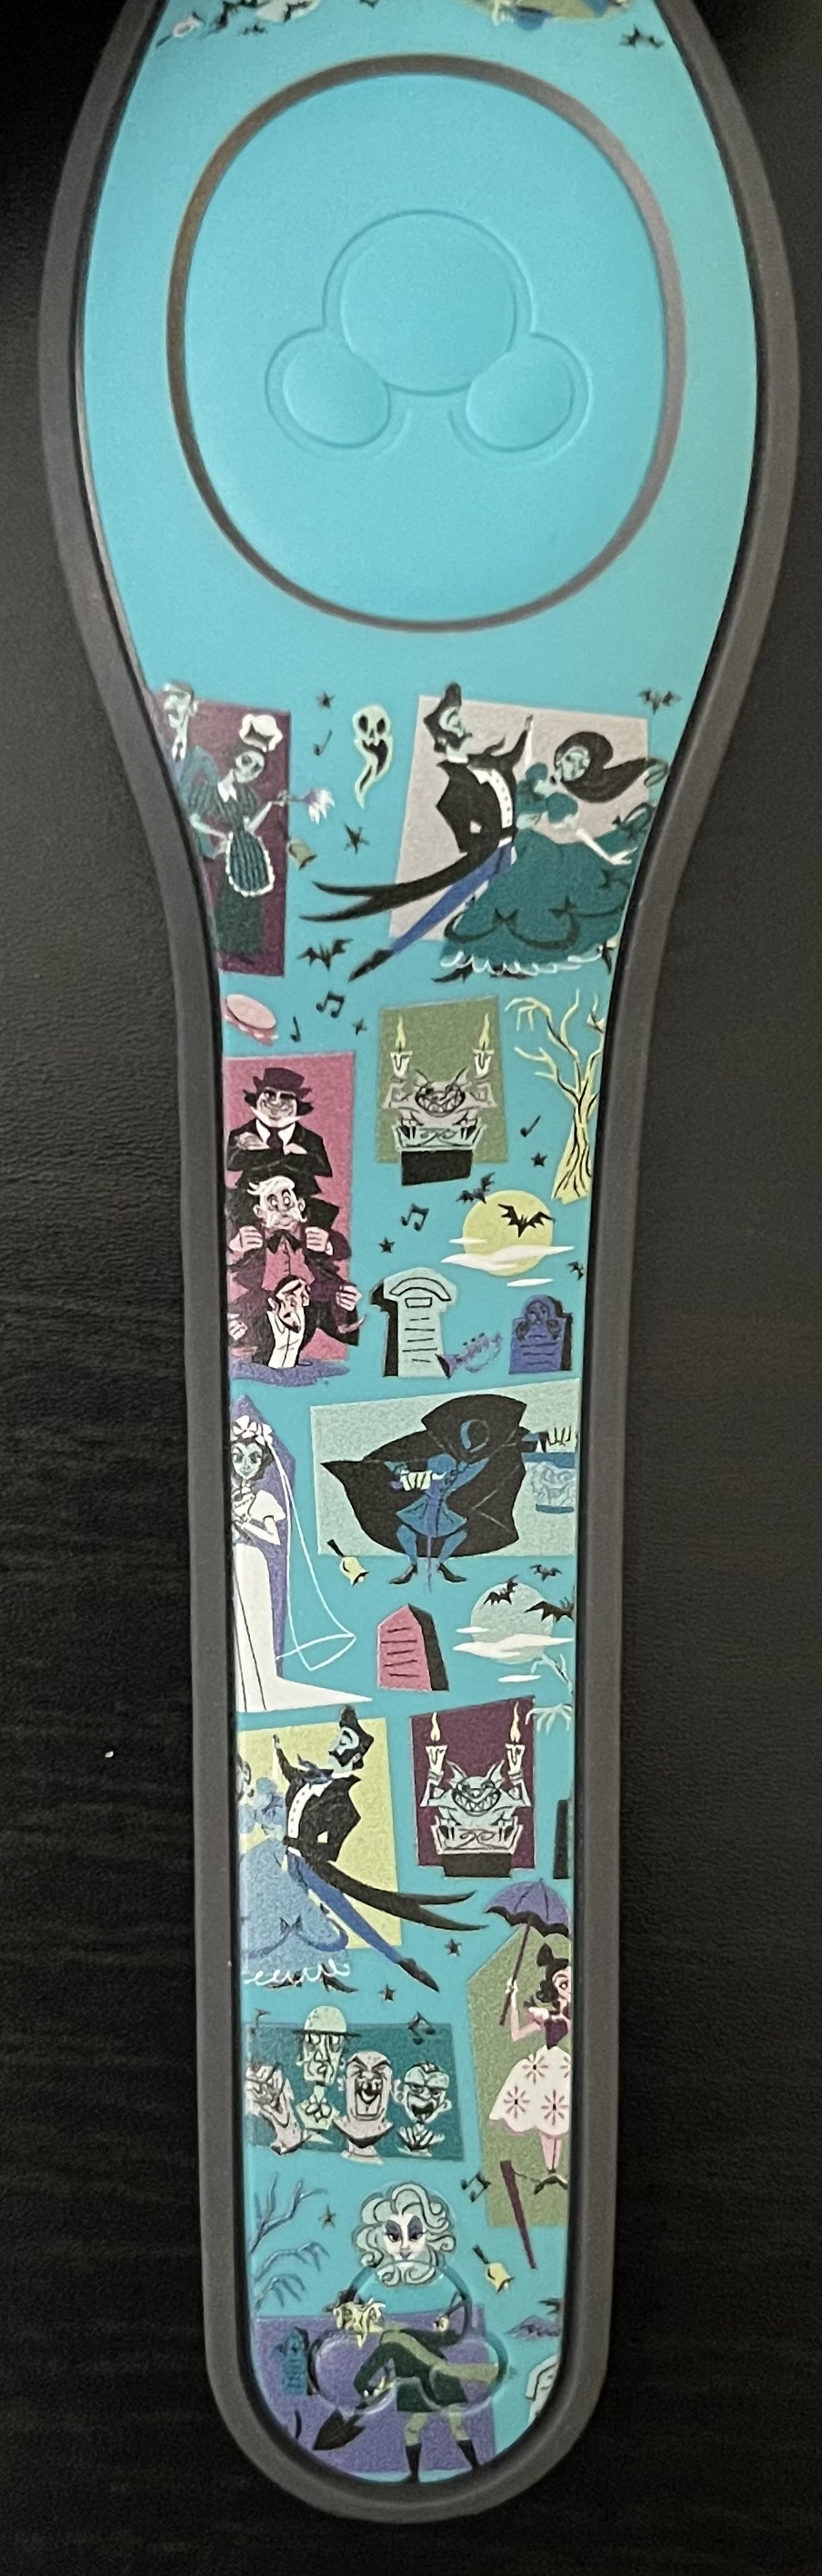 Check out this new Dooney & Bourke – Haunted Mansion Pattern Limited Edition 2500 MagicBand just released